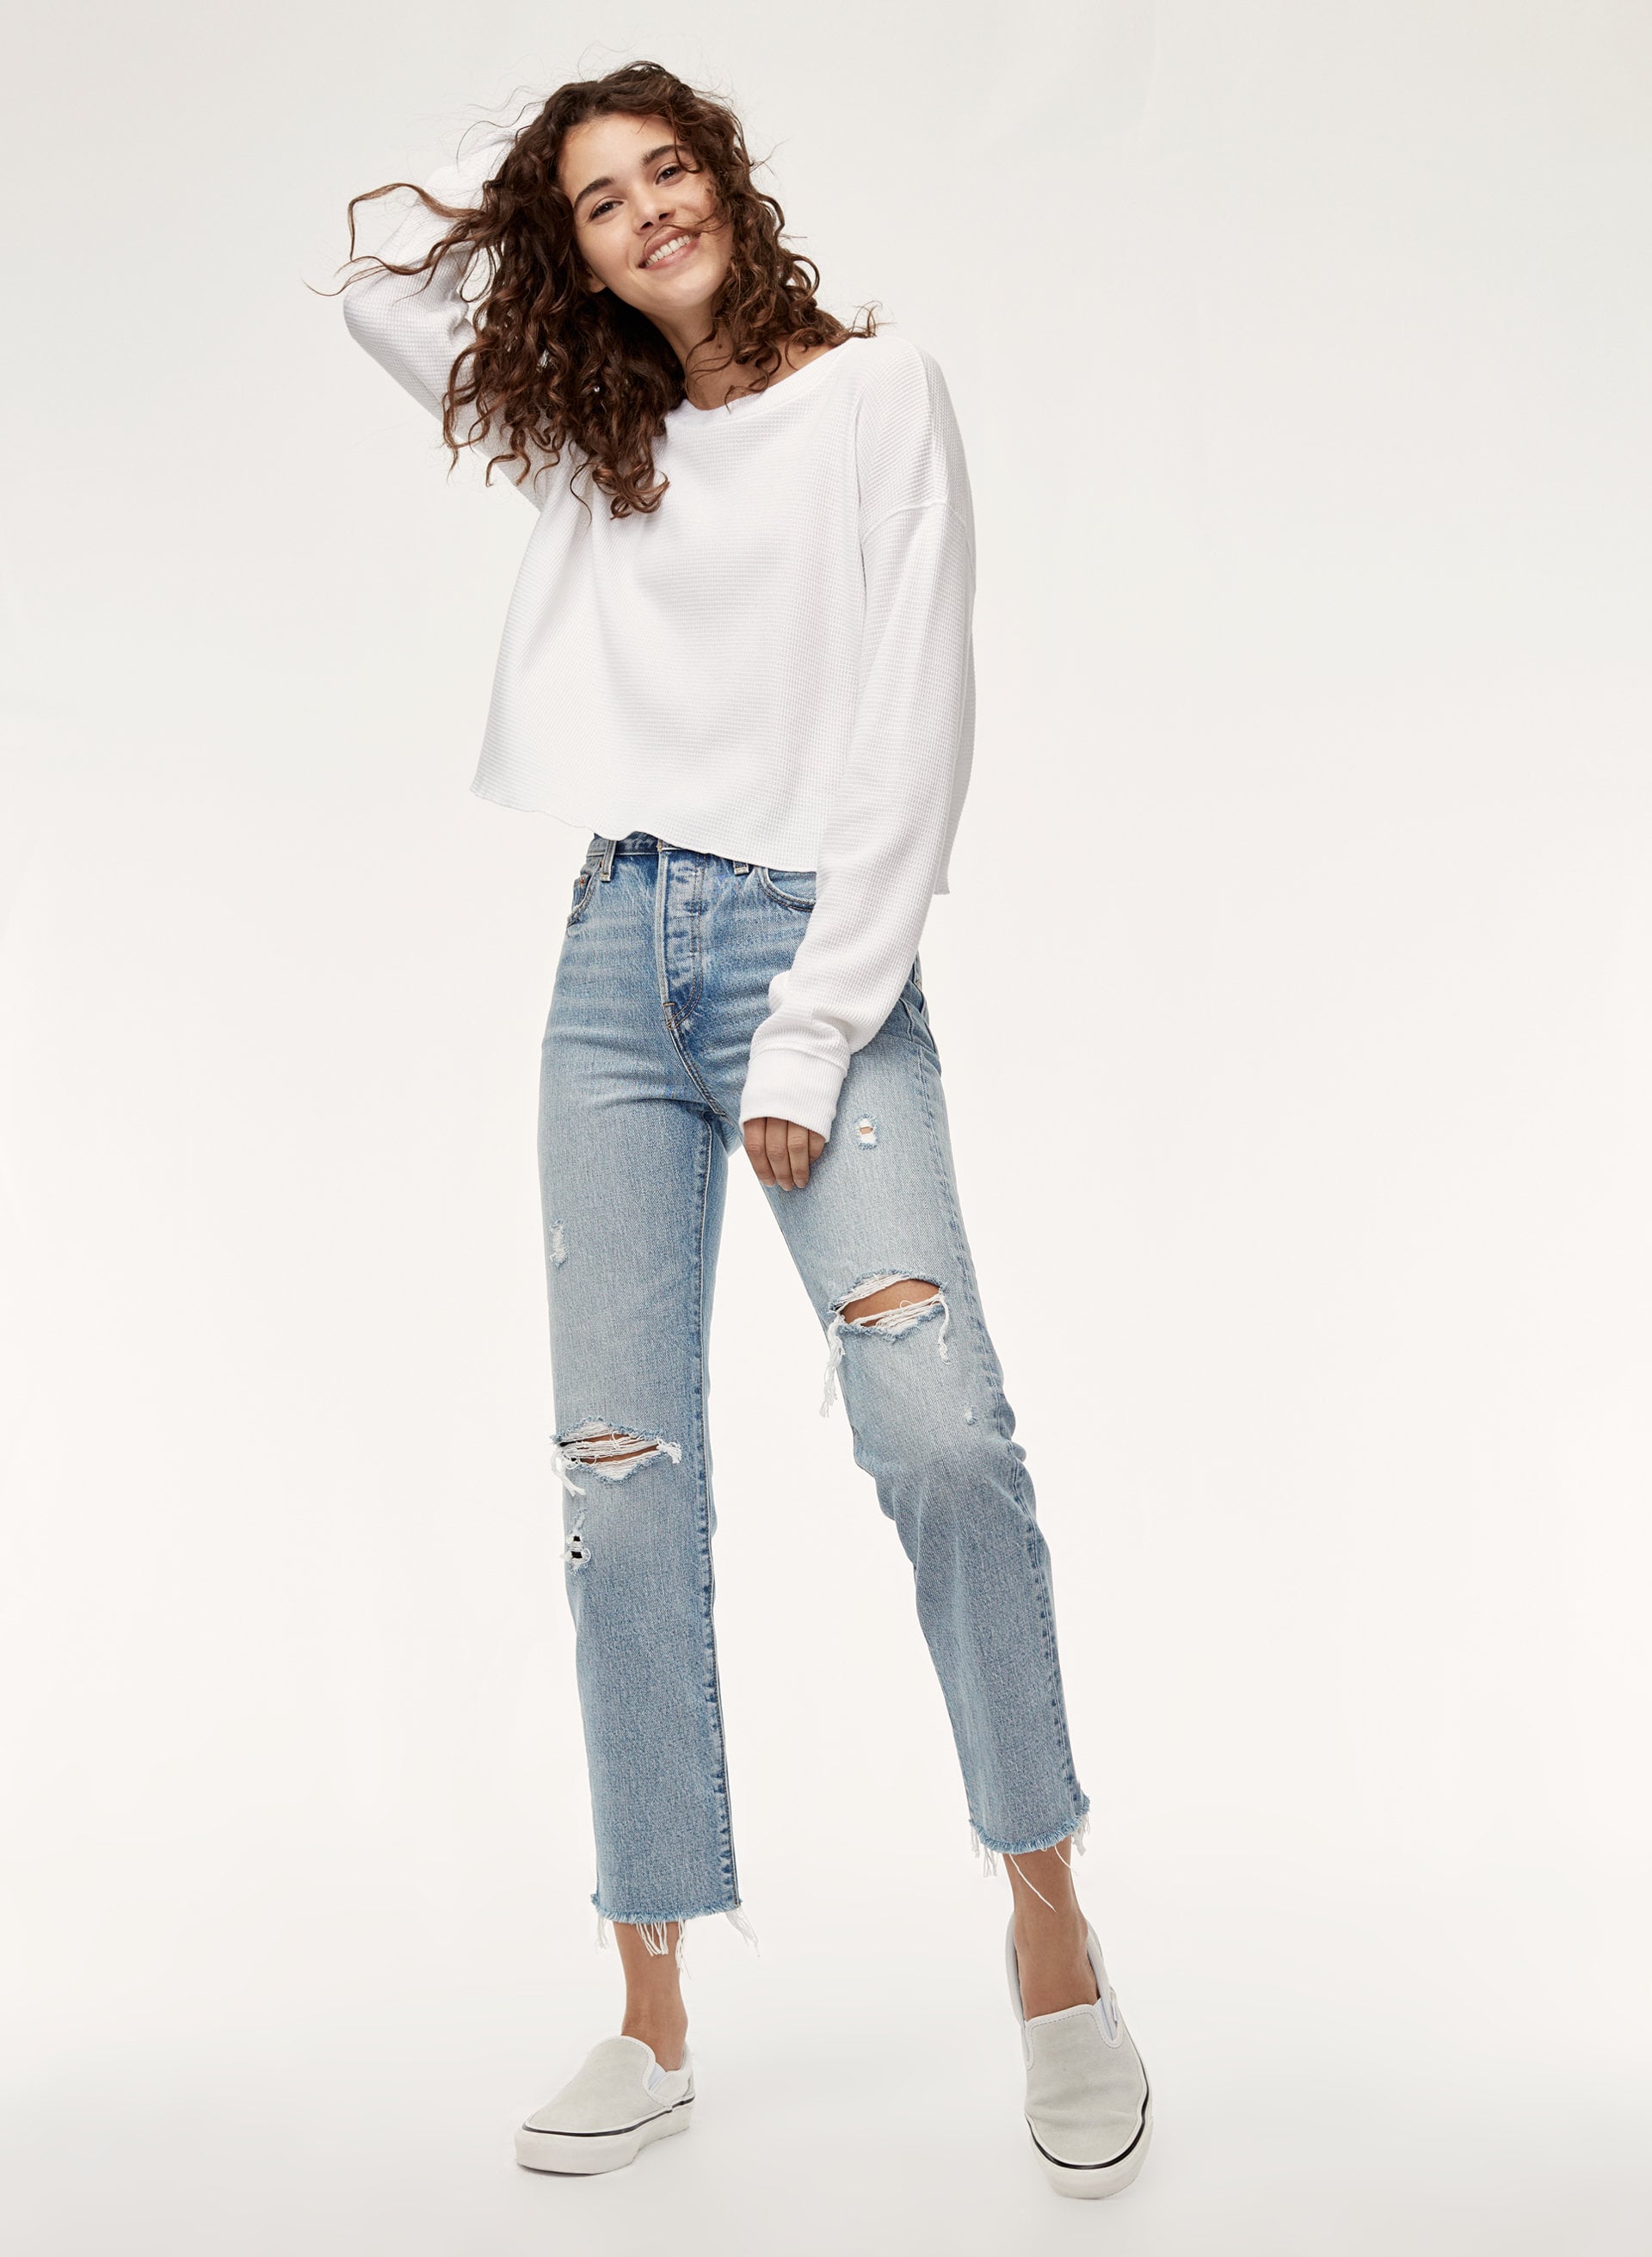 Levi's Wedgie Straight Jean | Fashion Girls! This Meghan Markle-Approved  Retailer Has All Your Summer Must Haves | POPSUGAR Fashion Photo 13